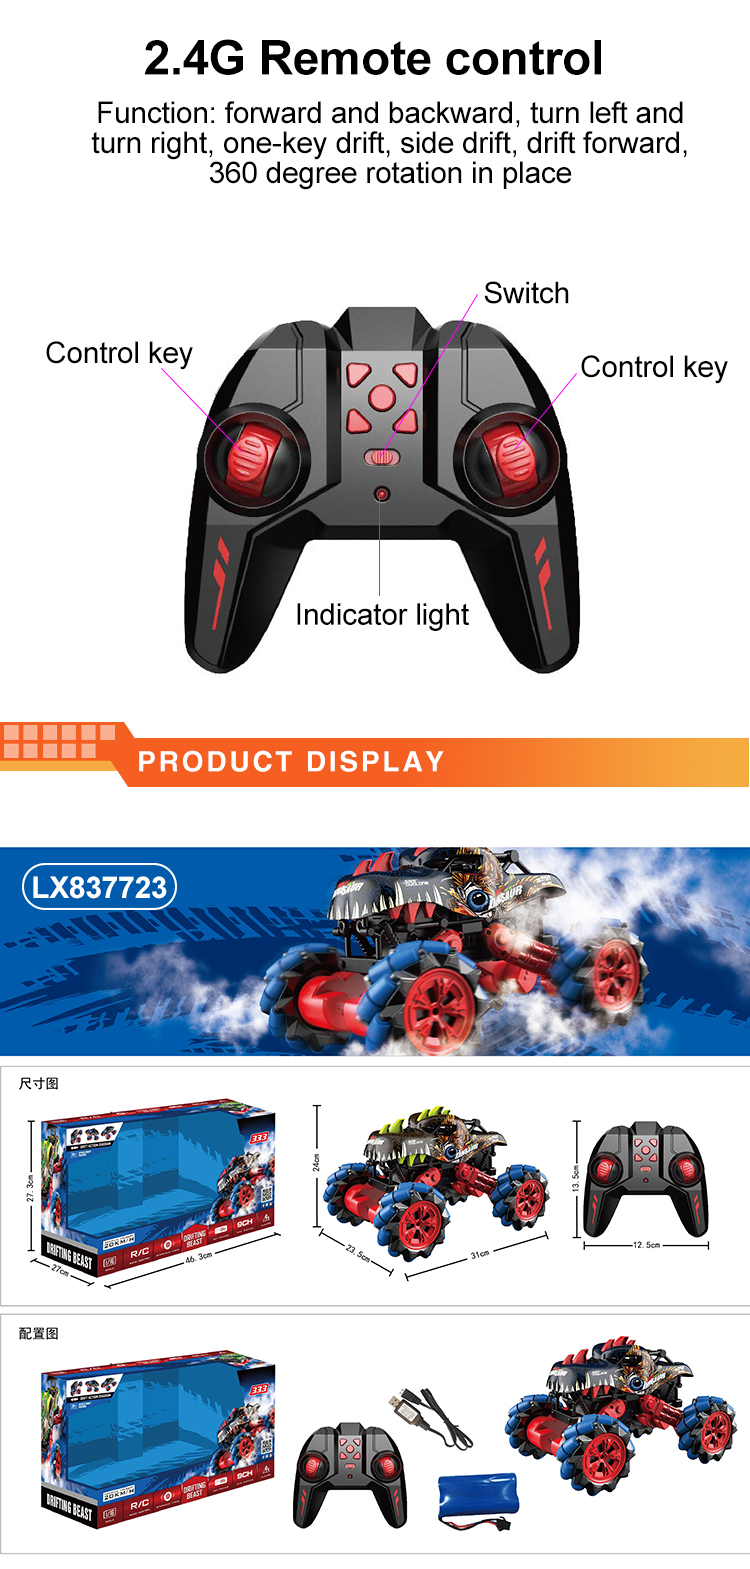 Toysmax professional remote control spider series for kids-2